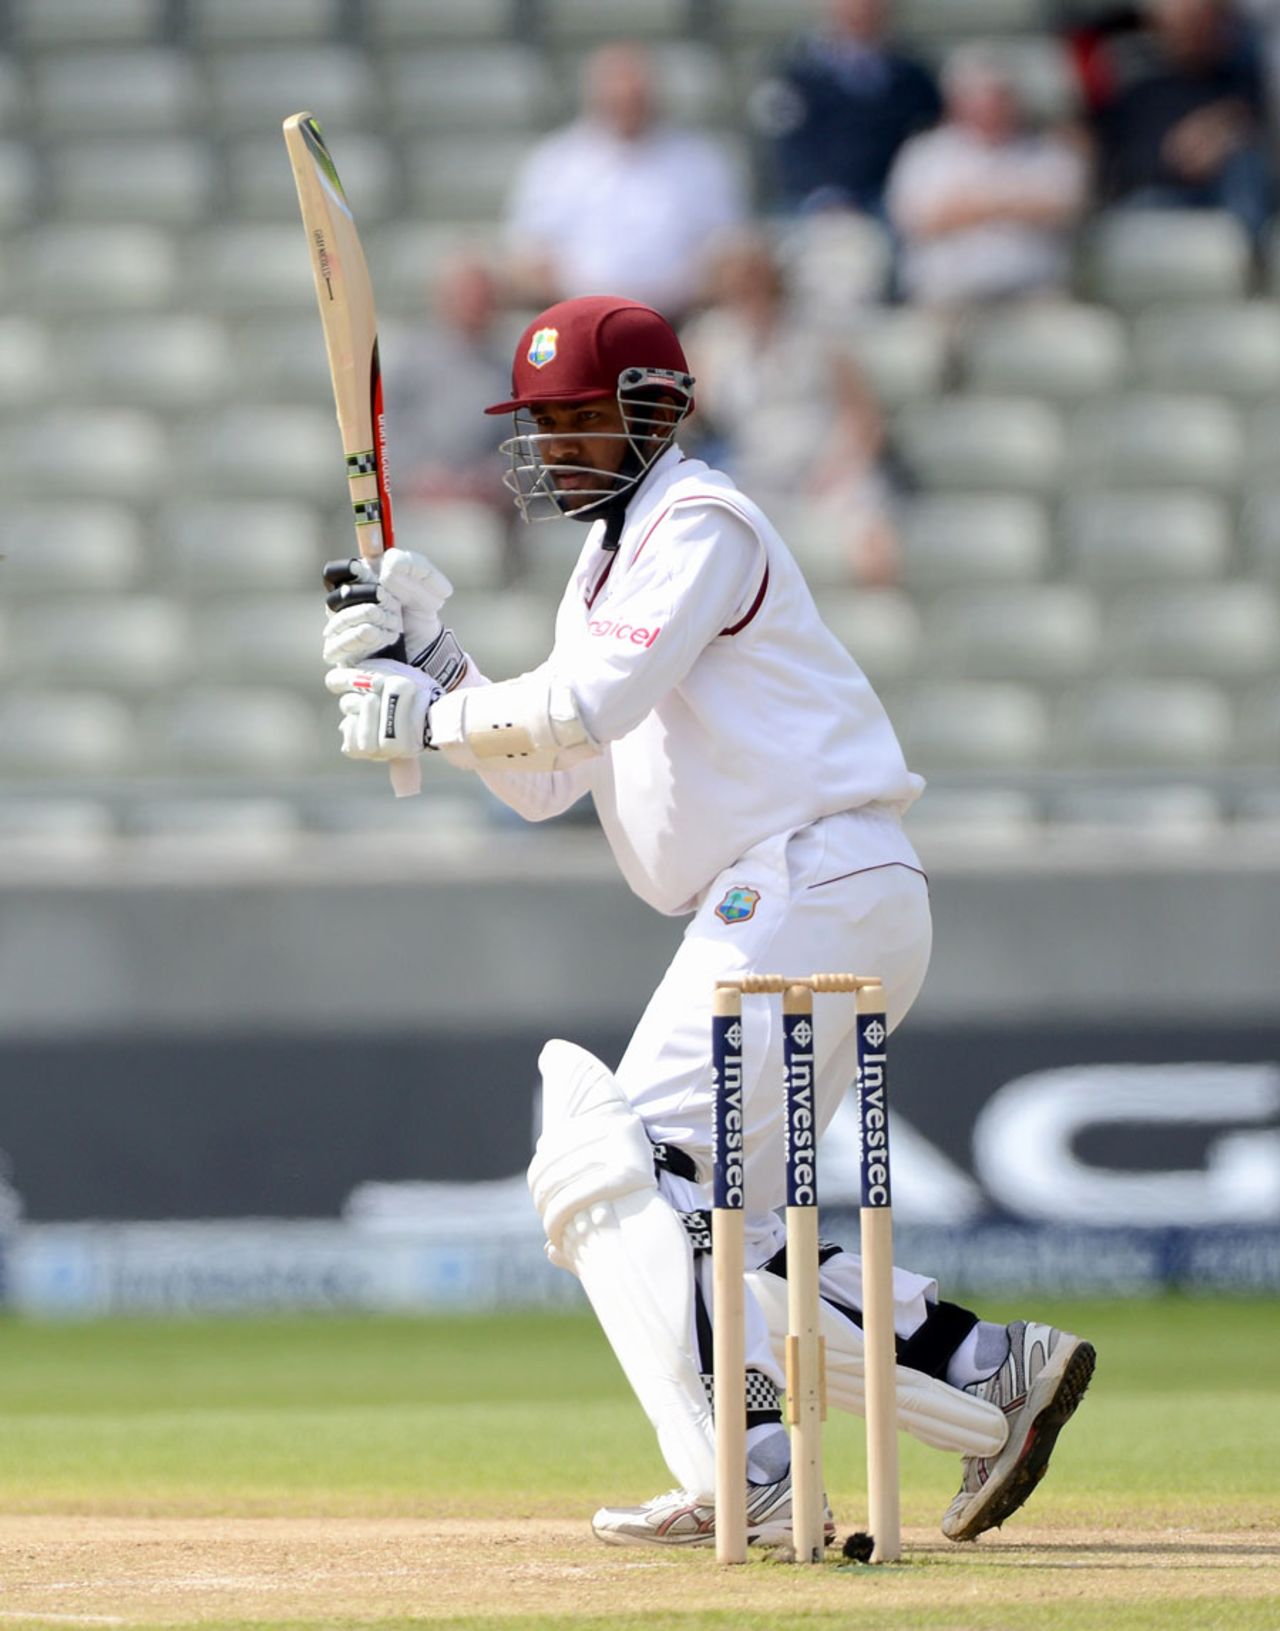 Denesh Ramdin kicked on from his fifty on the fourth morning, England v West Indies, 3rd Test, Edgbaston, 4th day, June 10, 2012